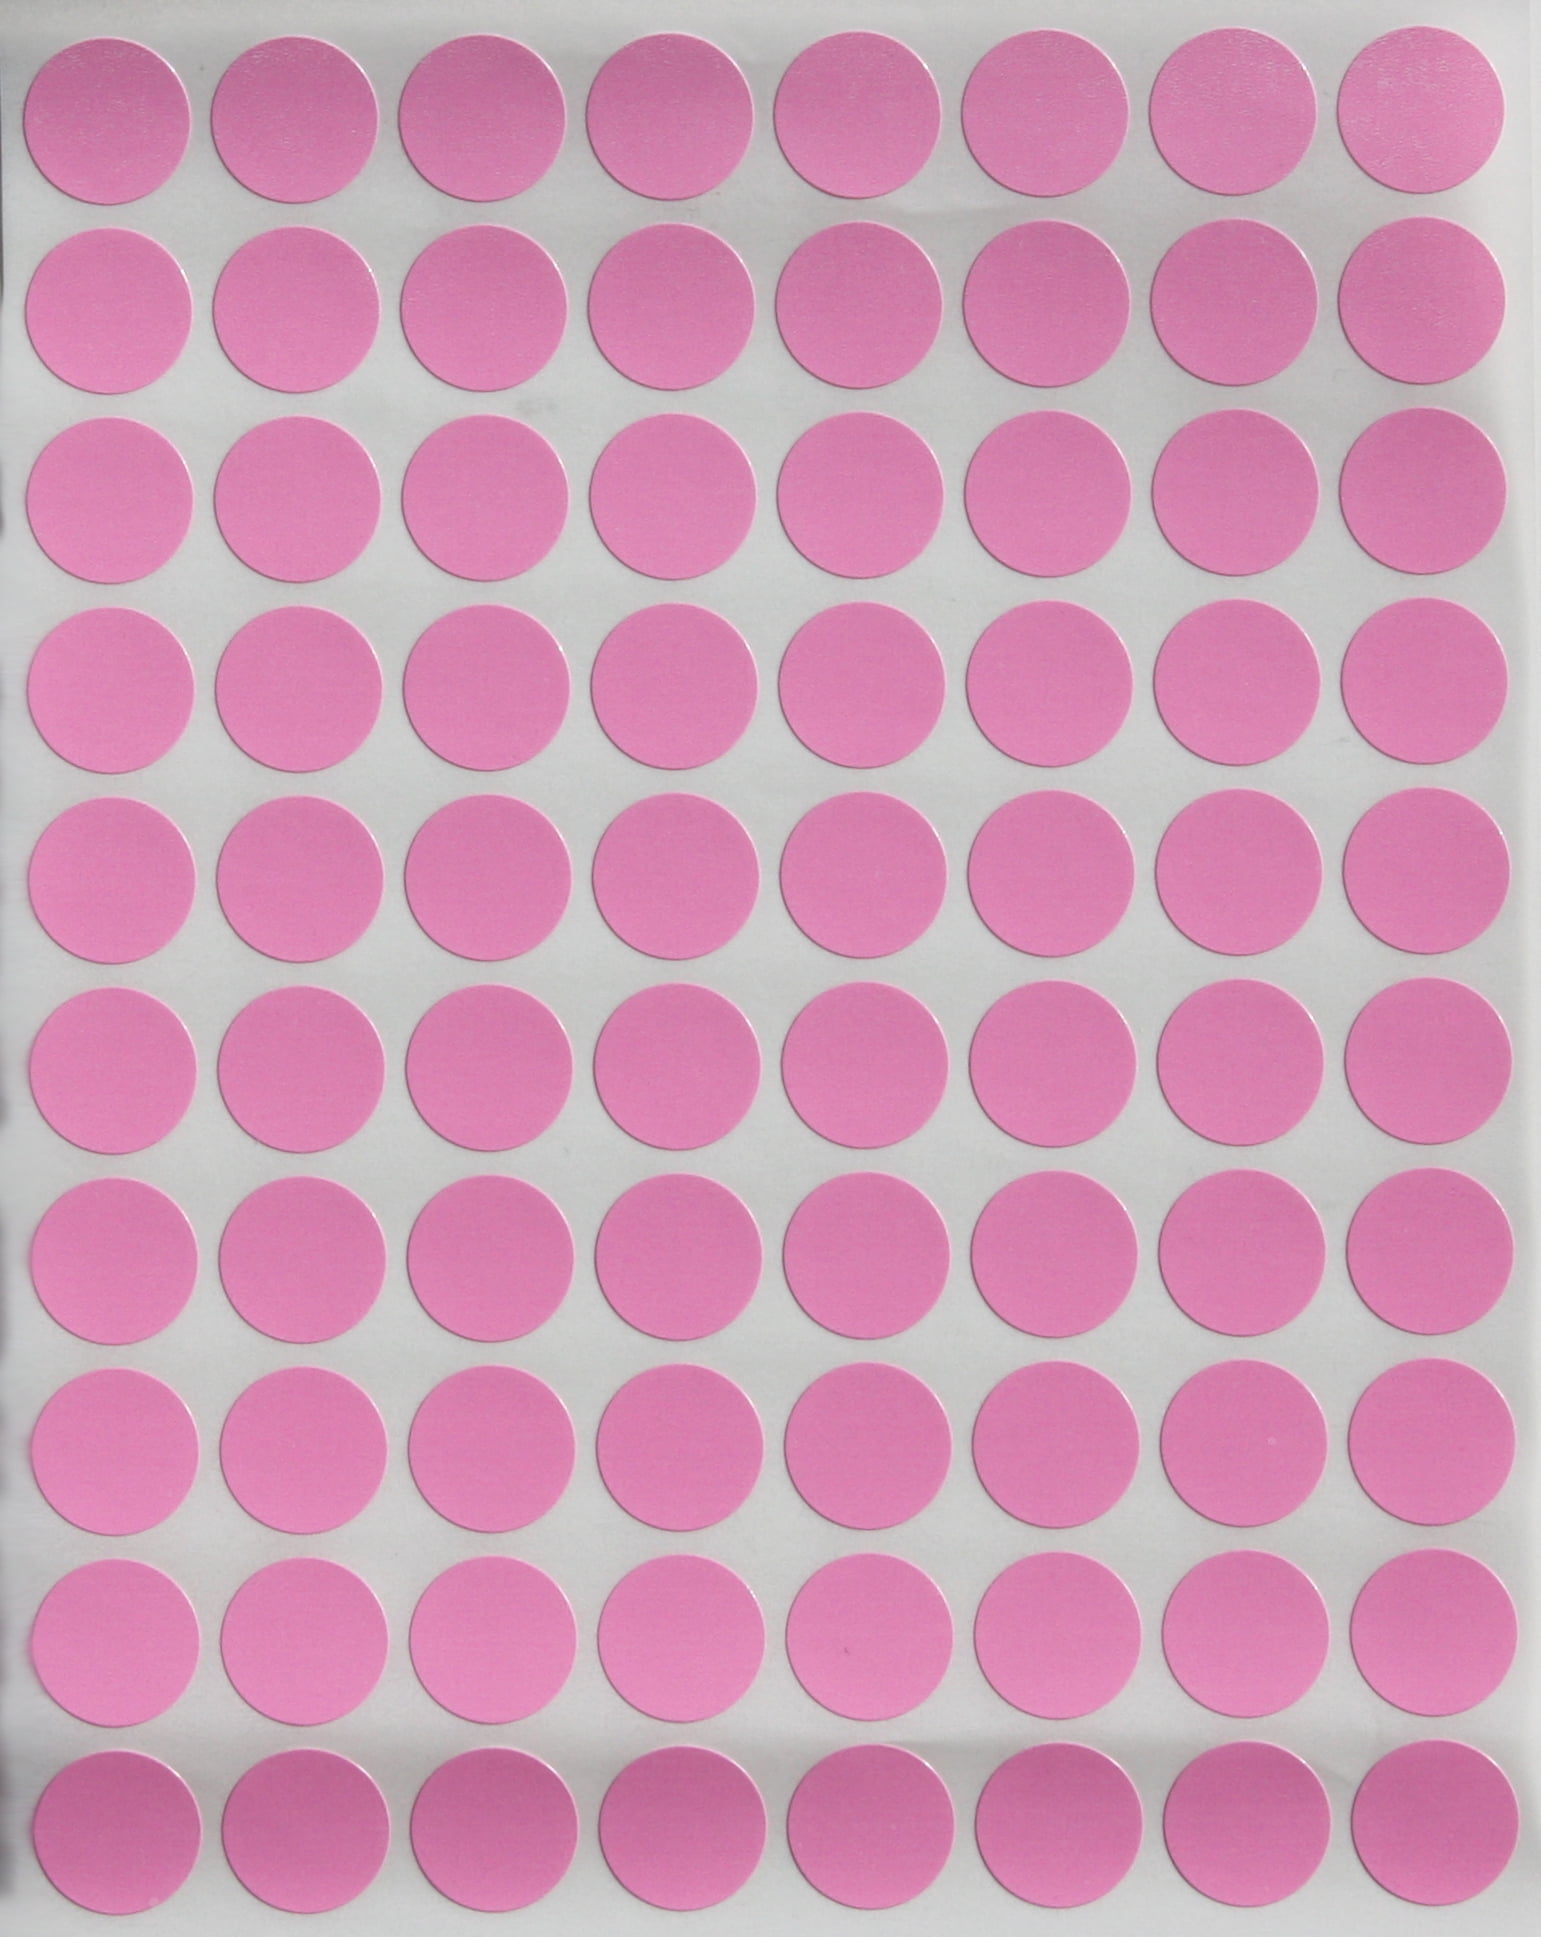 1/2" PINK Round Vinyl Color Coded Inventory Label Dots Stickers USA MADE